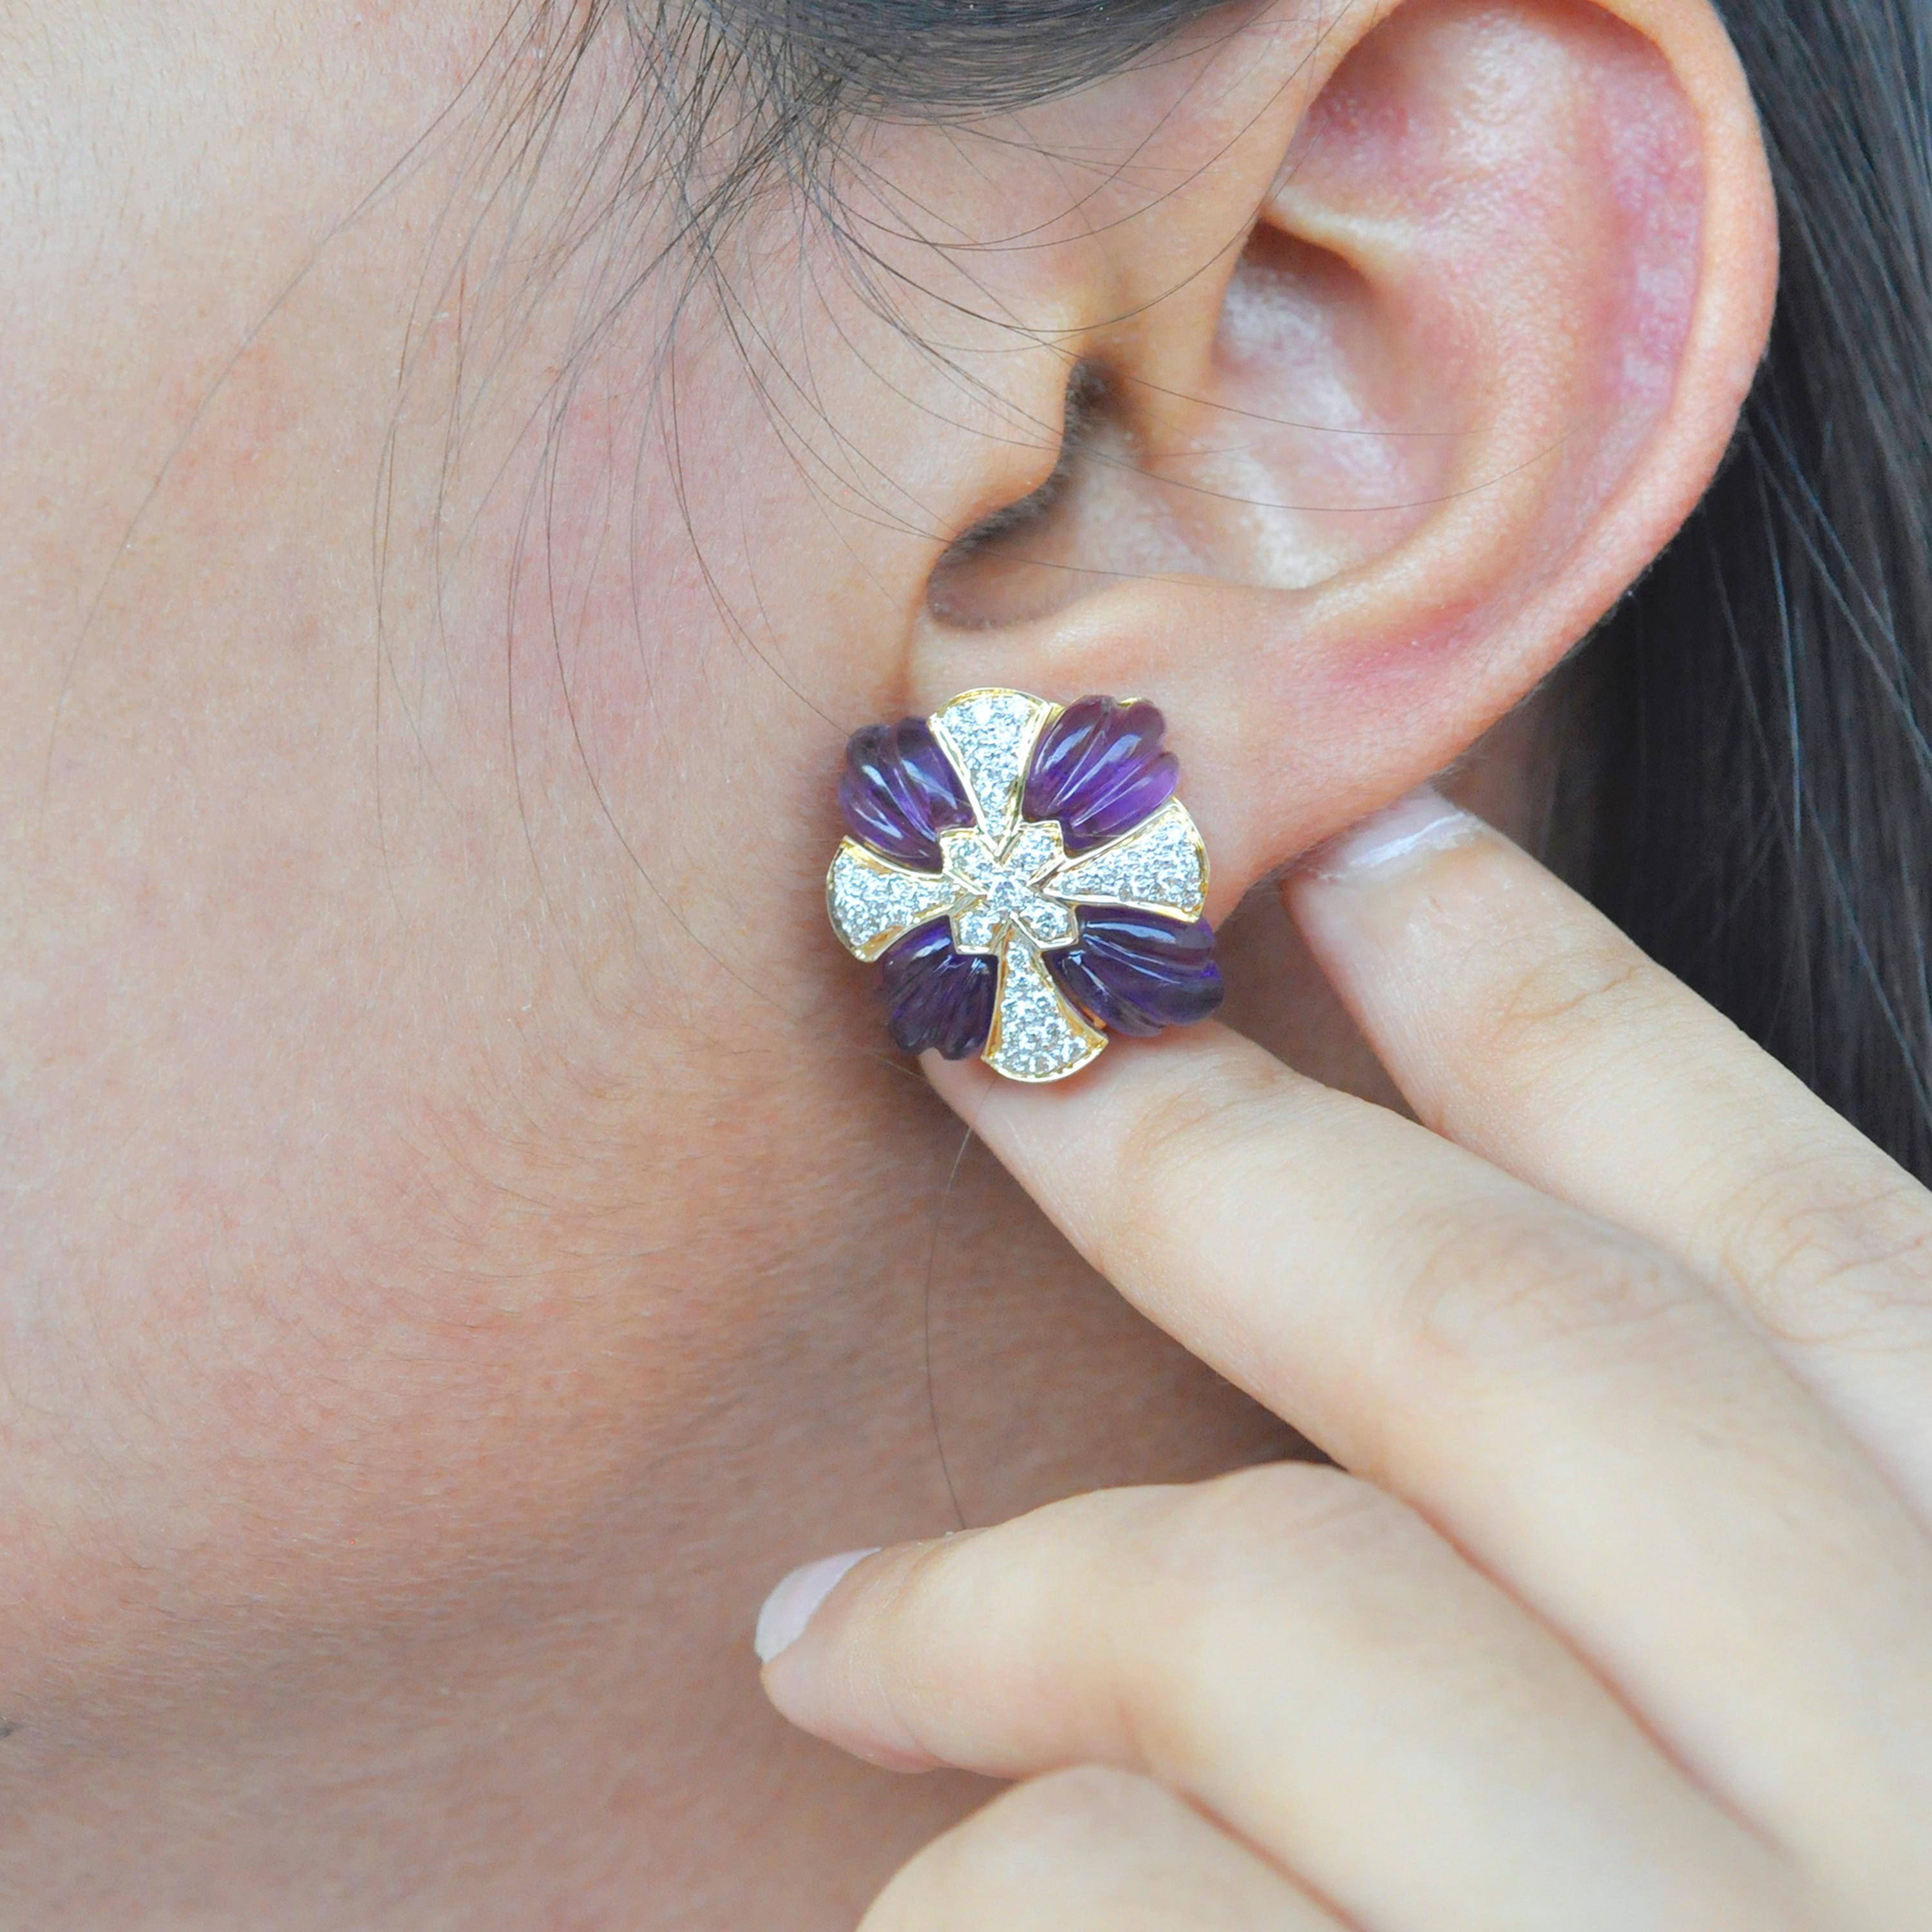 18 Karat Gold Natural One-of-a-Kind Amethyst Carving with Diamond Stud Earrings For Sale 6